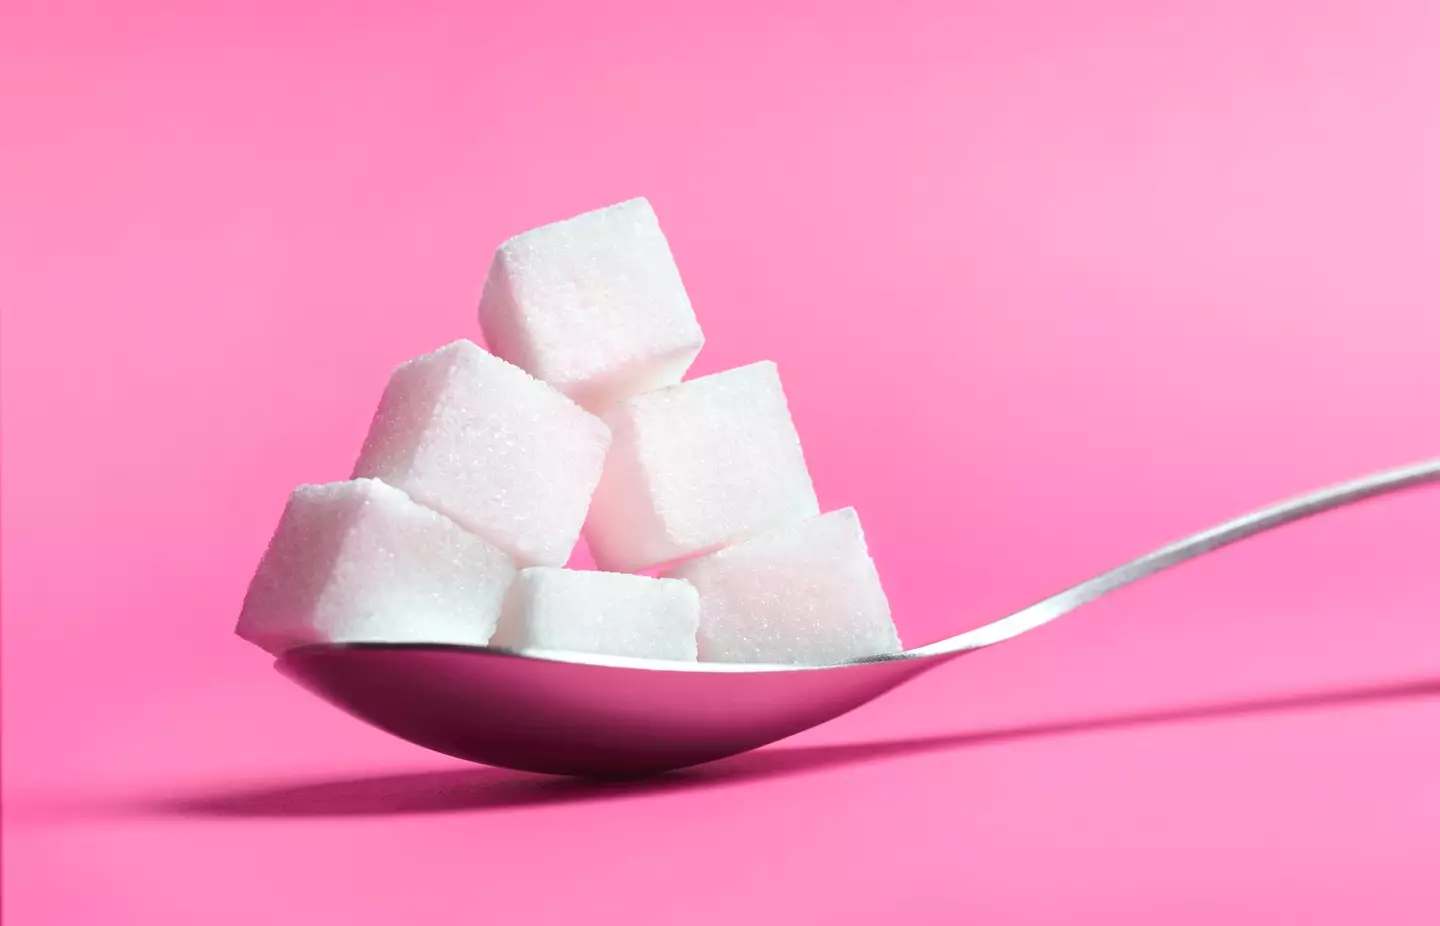 Sugar is a contributor to obesity.